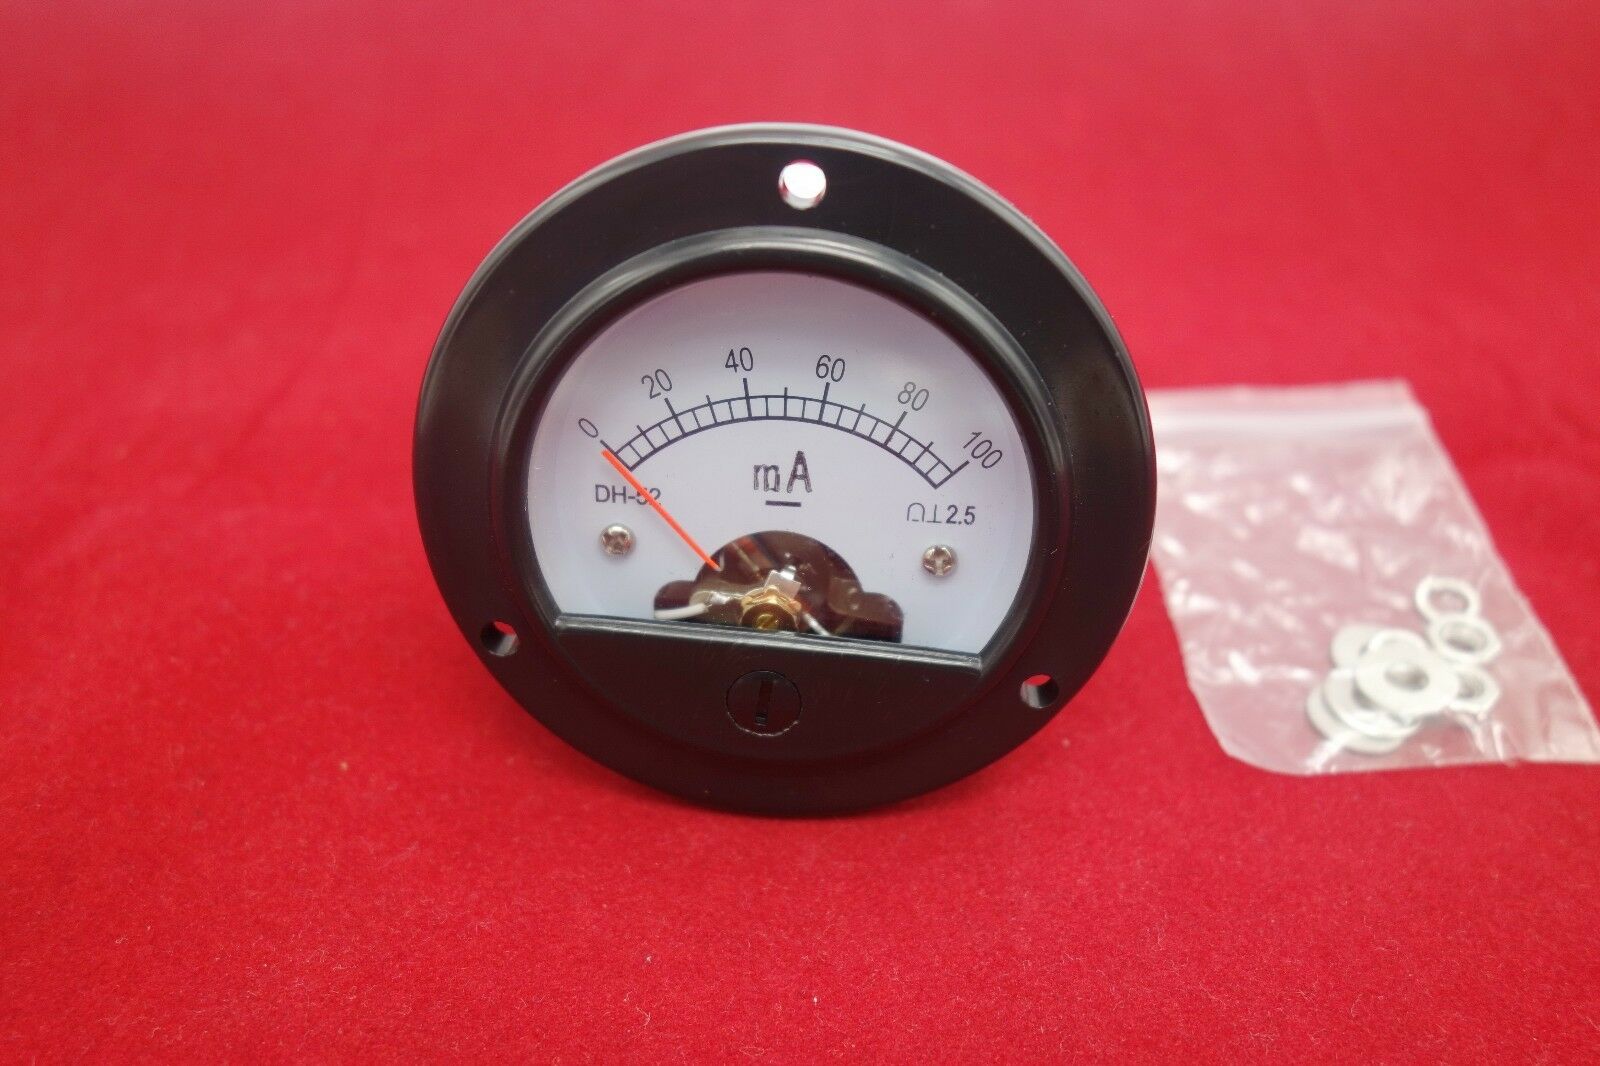 DC 0-100mA Round Analog Ammeter Panel Current Dia. 66.4mm DH52 direct connect